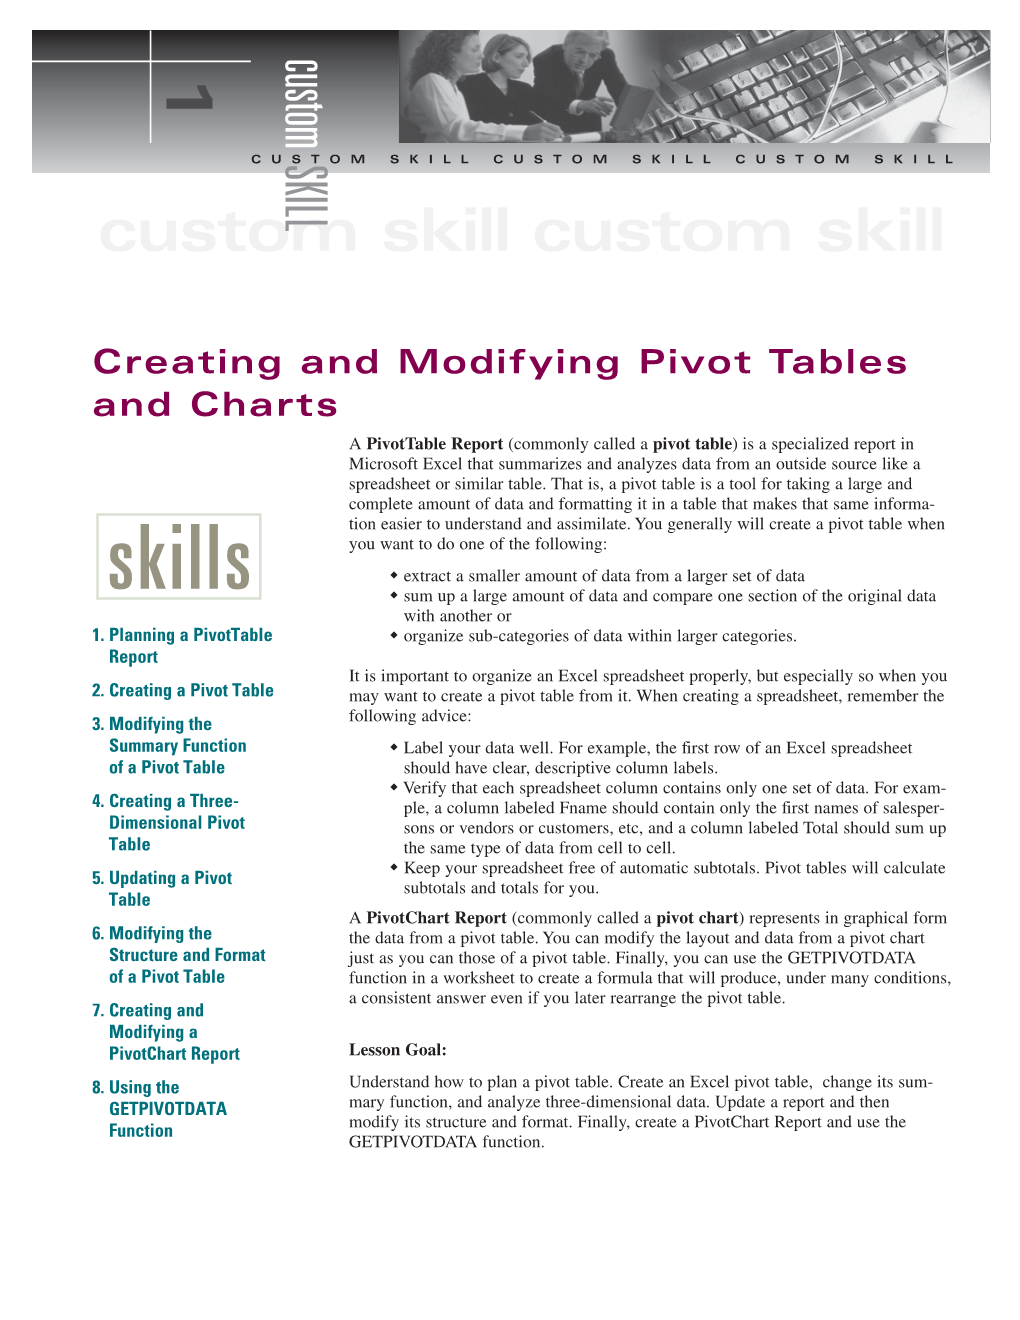 Building and Using Pivot Tables